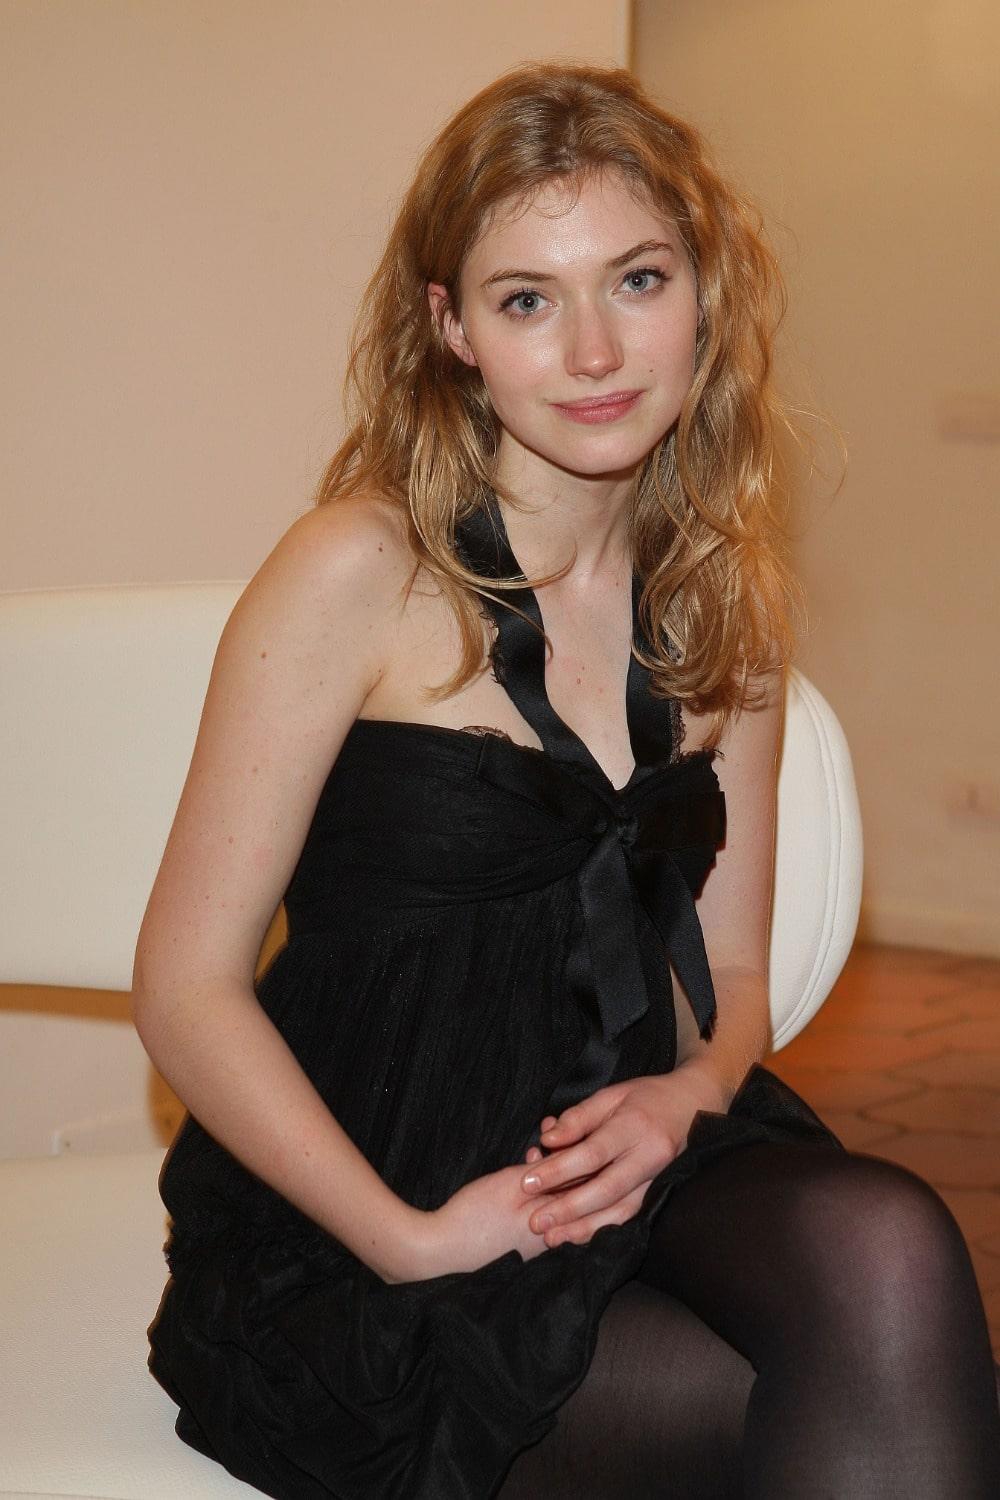 60+ Hot Pictures Of Imogen Poots Are Really Mesmerising To Watch | Best Of Comic Books